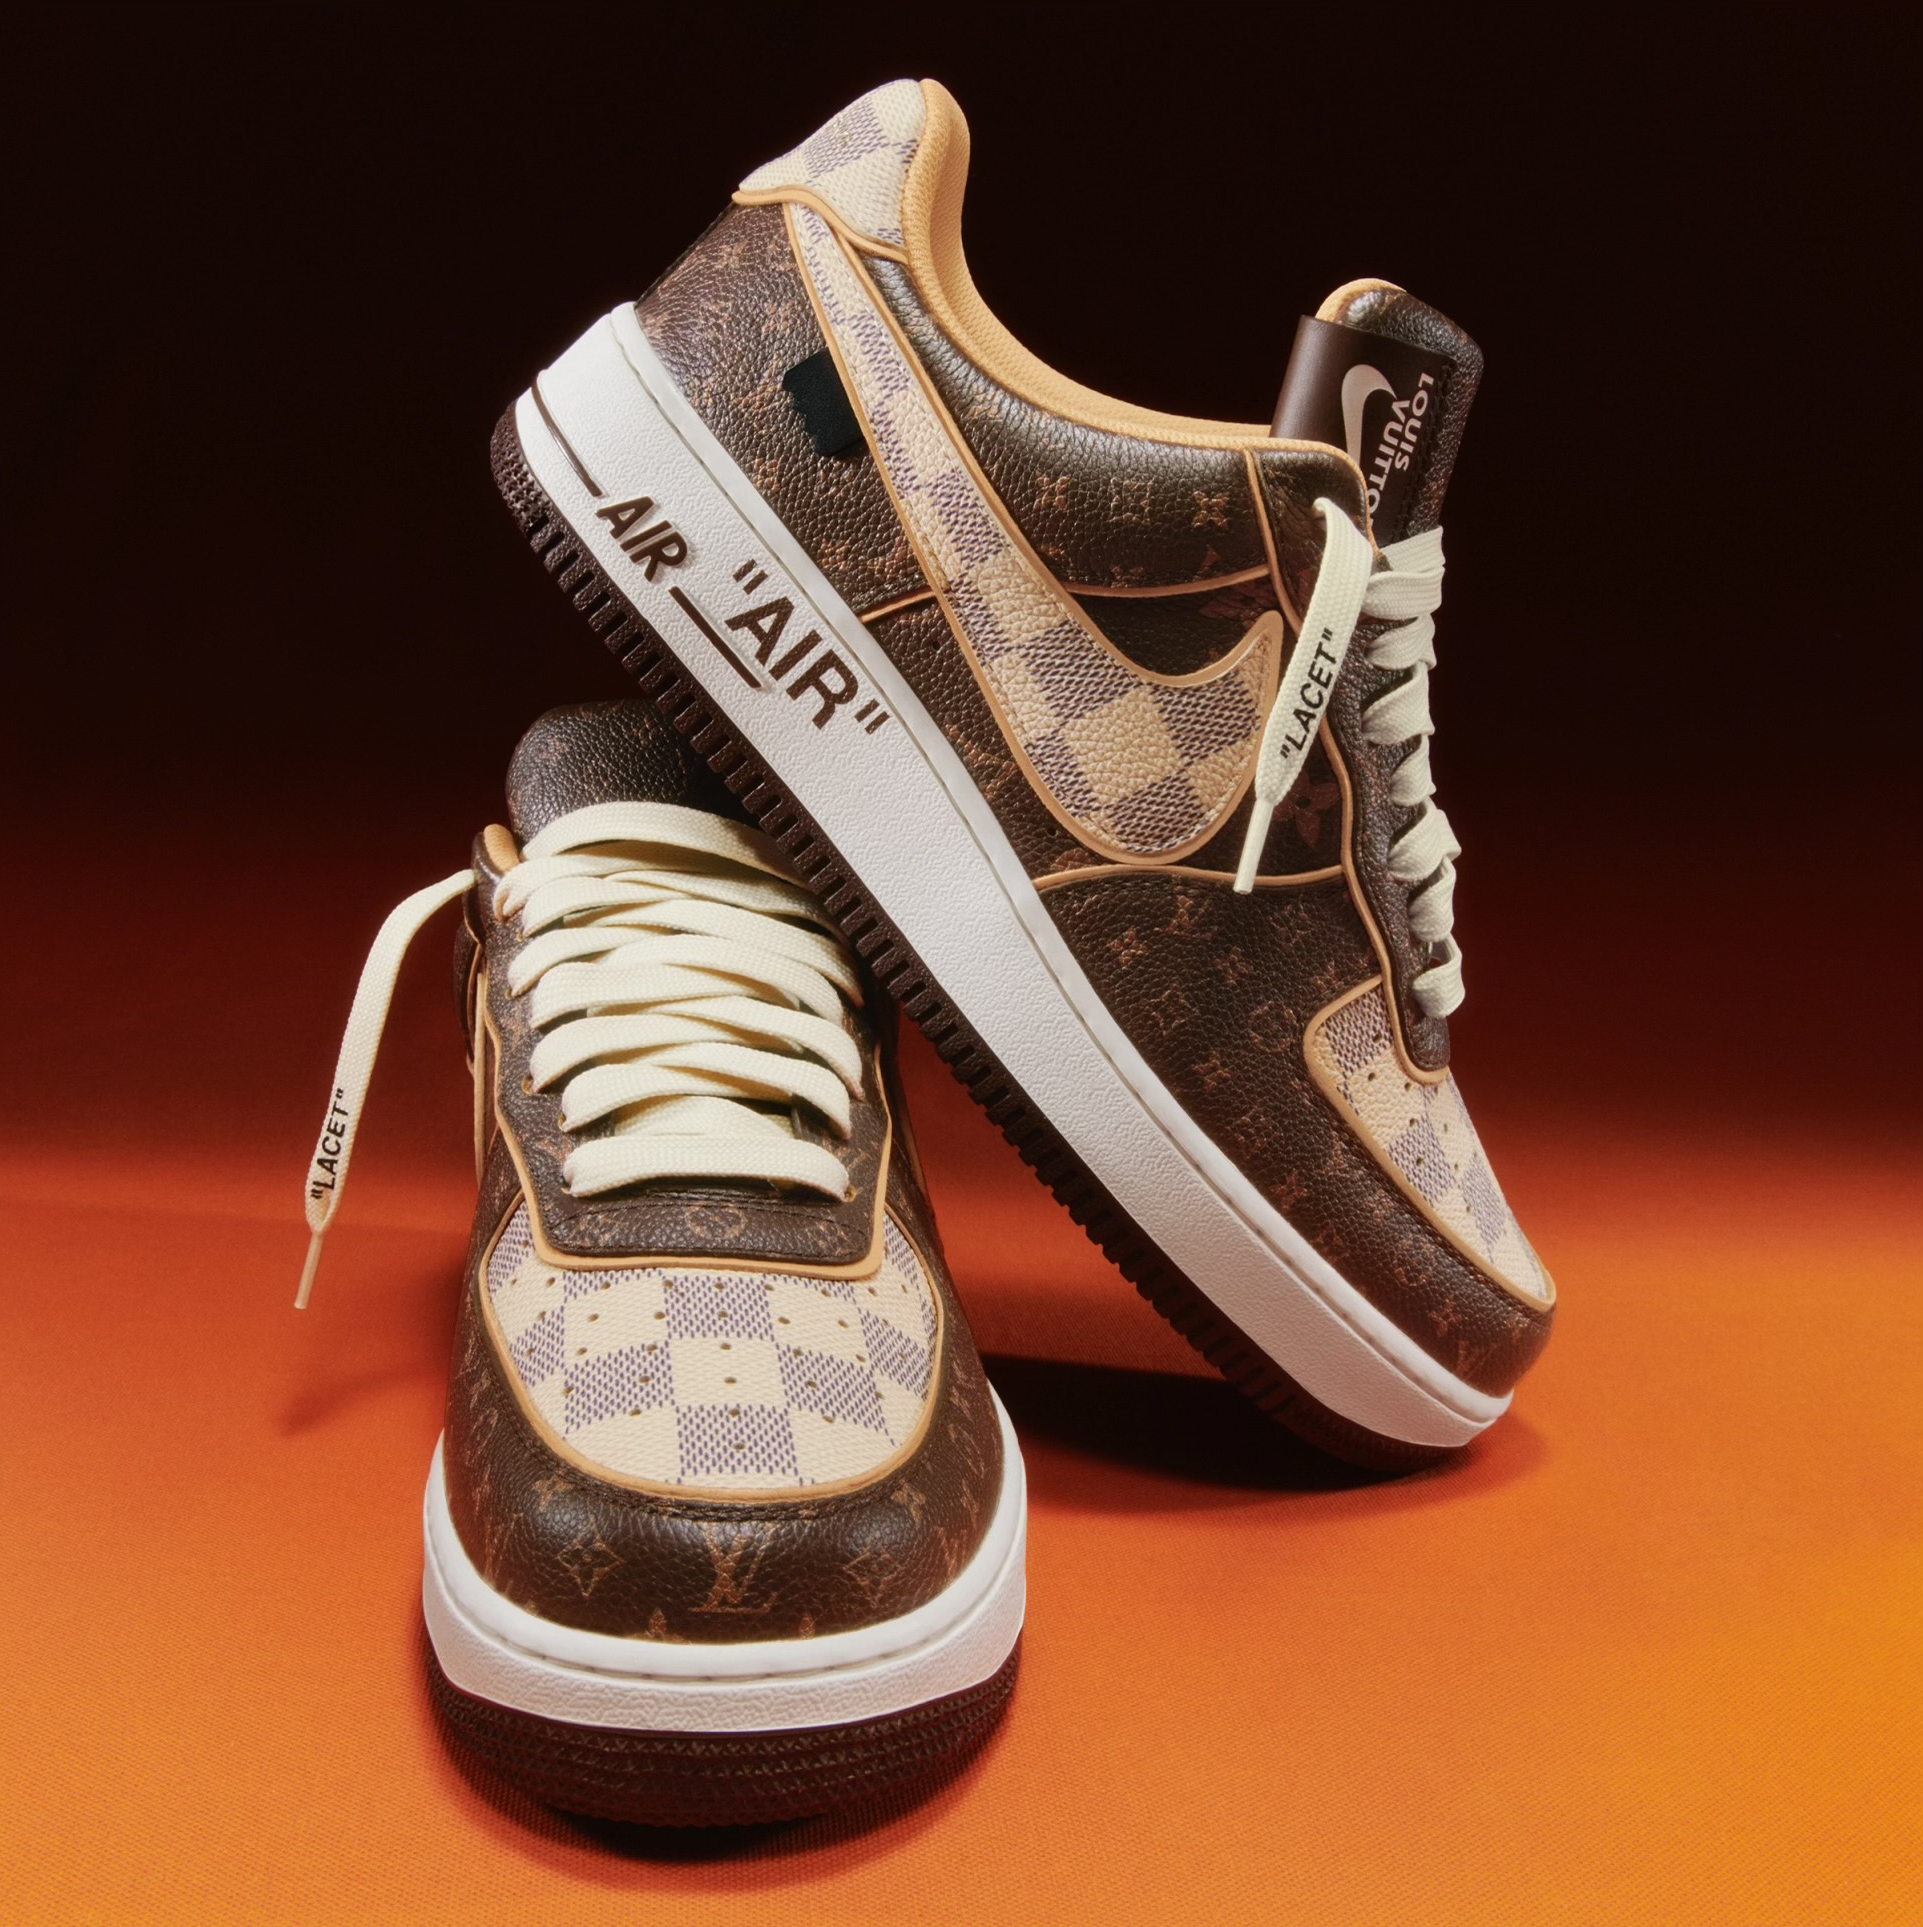 Louis Vuitton x Nike Air Force 1 Auction Exclusive Shoe to Benefit 